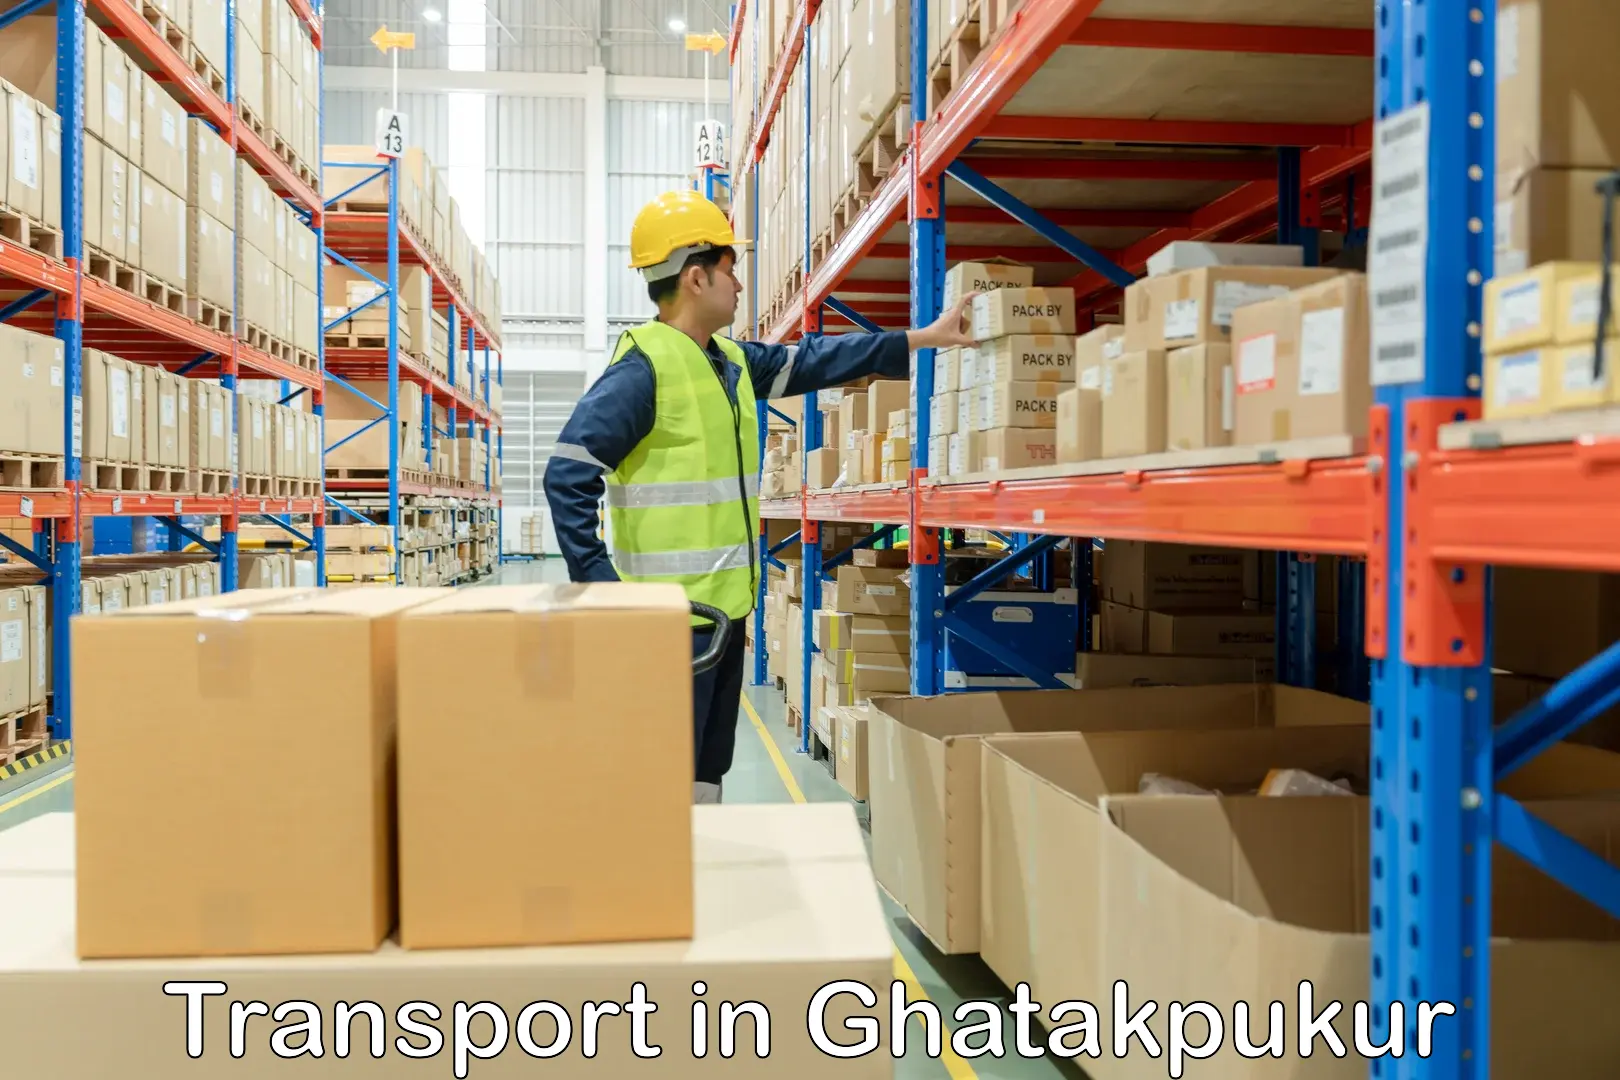 Transport services in Ghatakpukur